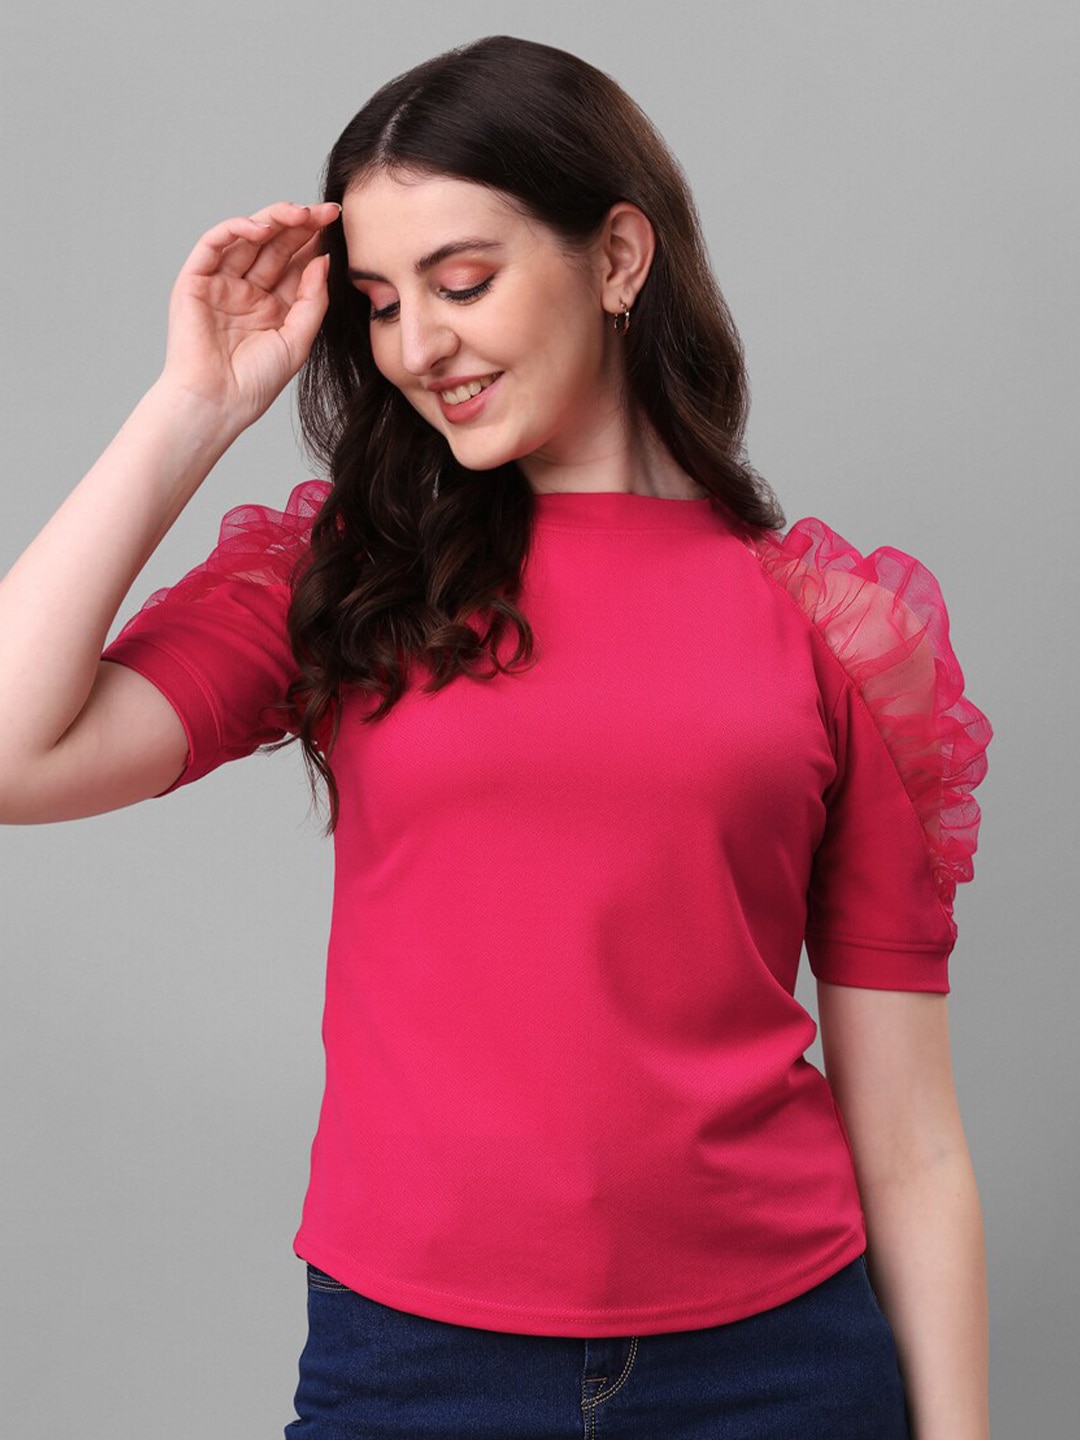 SHEETAL Associates Gathered Or Pleated Puff Sleeves High Neck Top Price in India